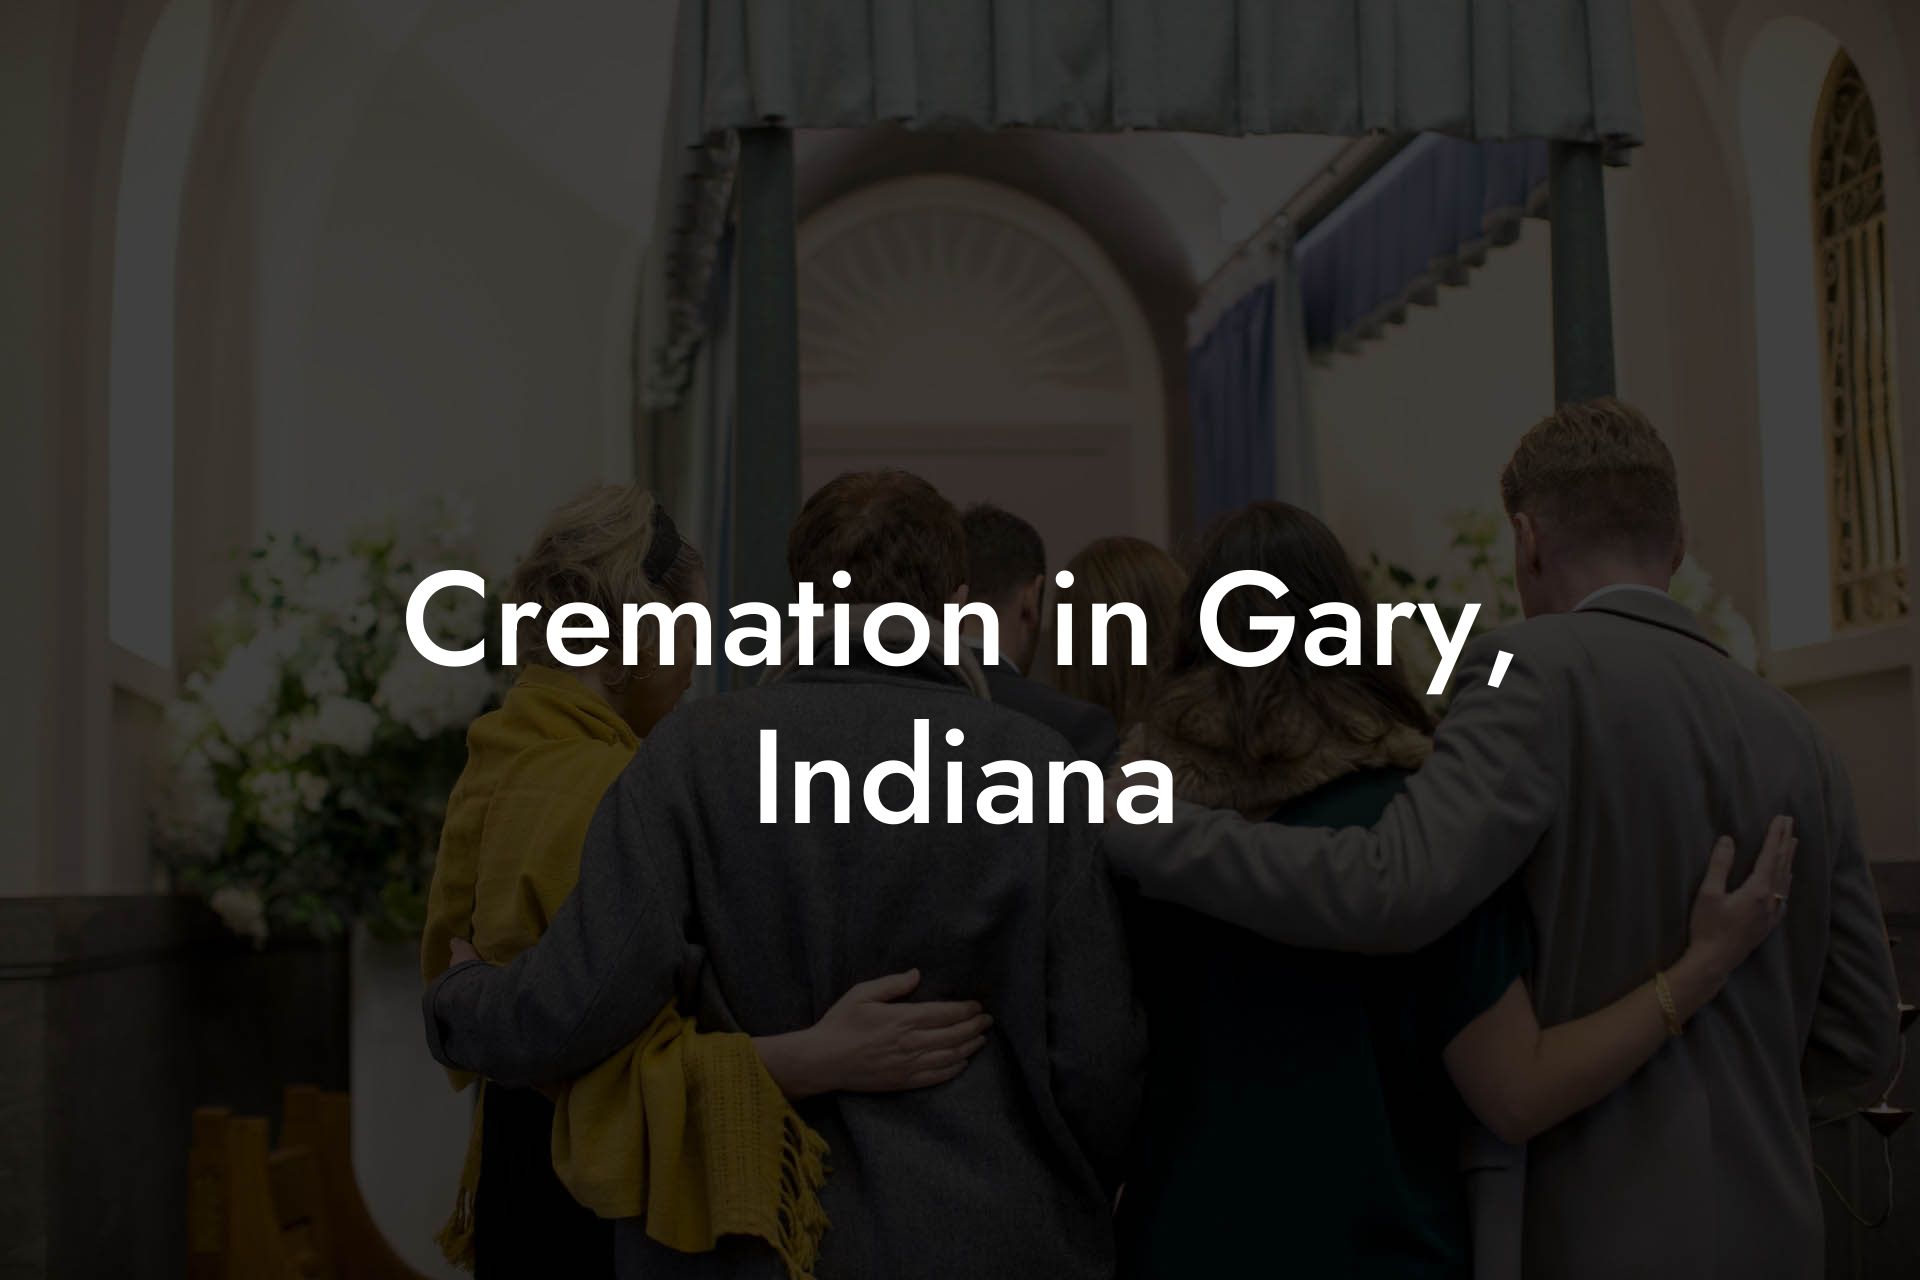 Cremation in Gary, Indiana